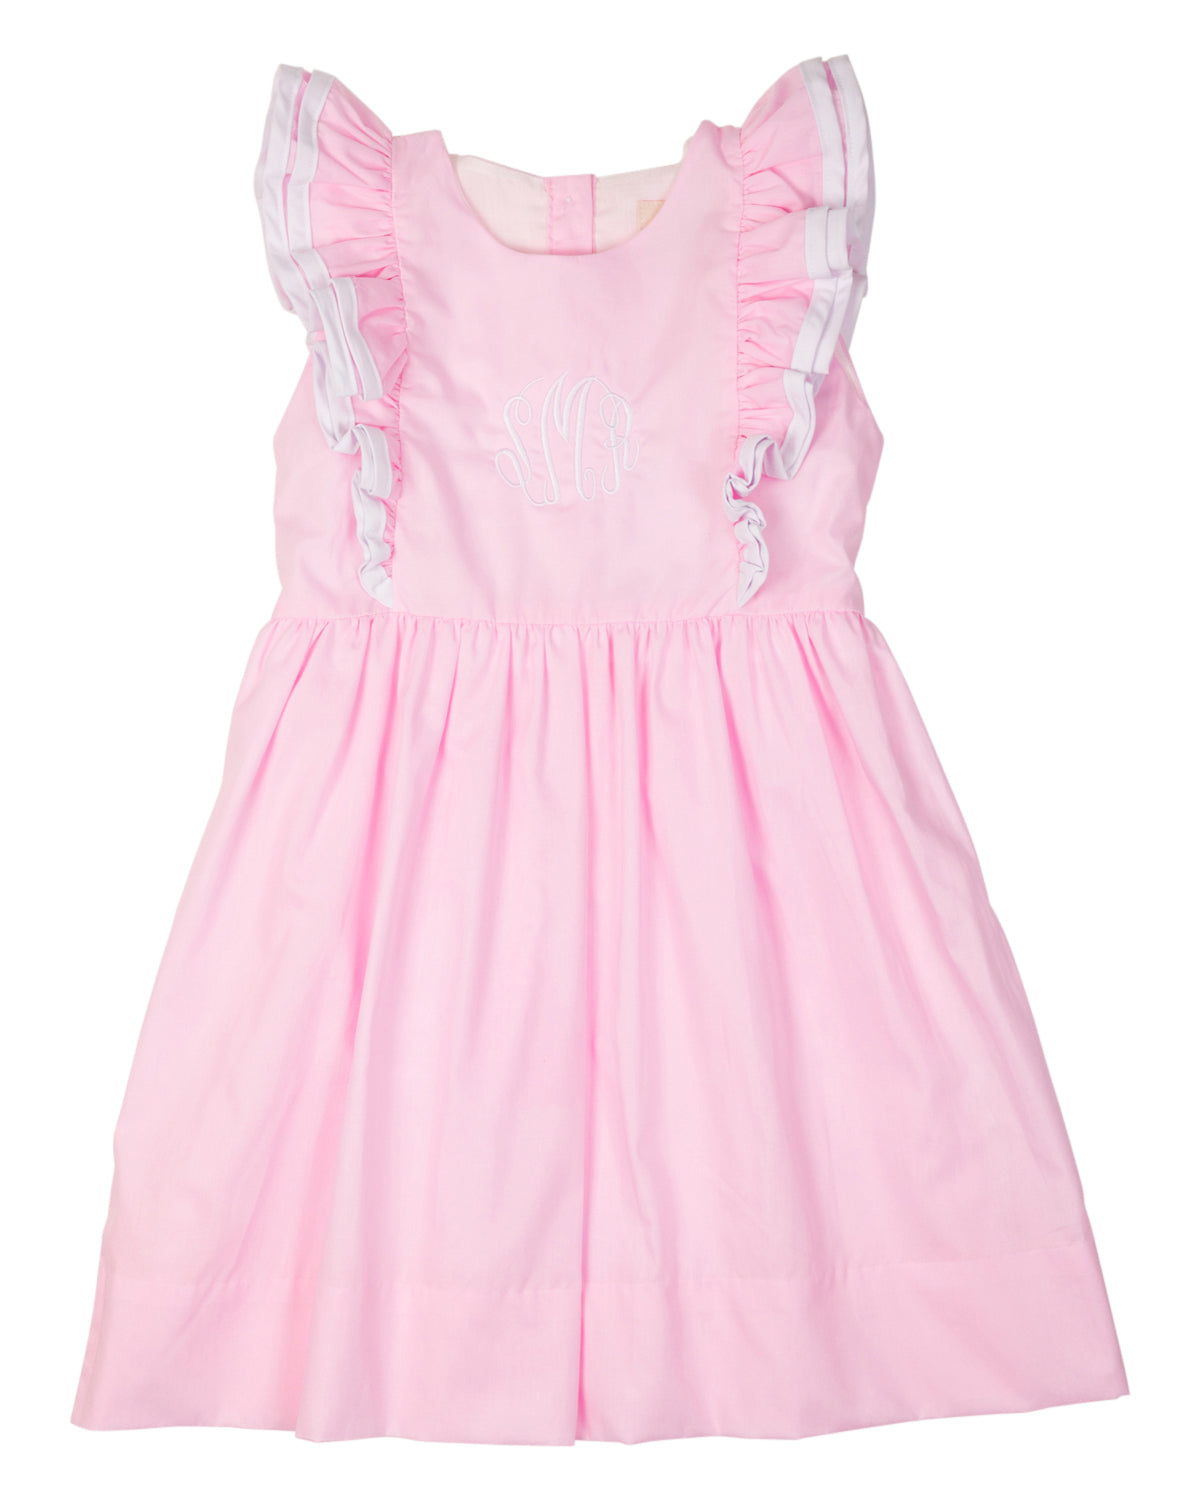 Pink Bell Dress with White Trim